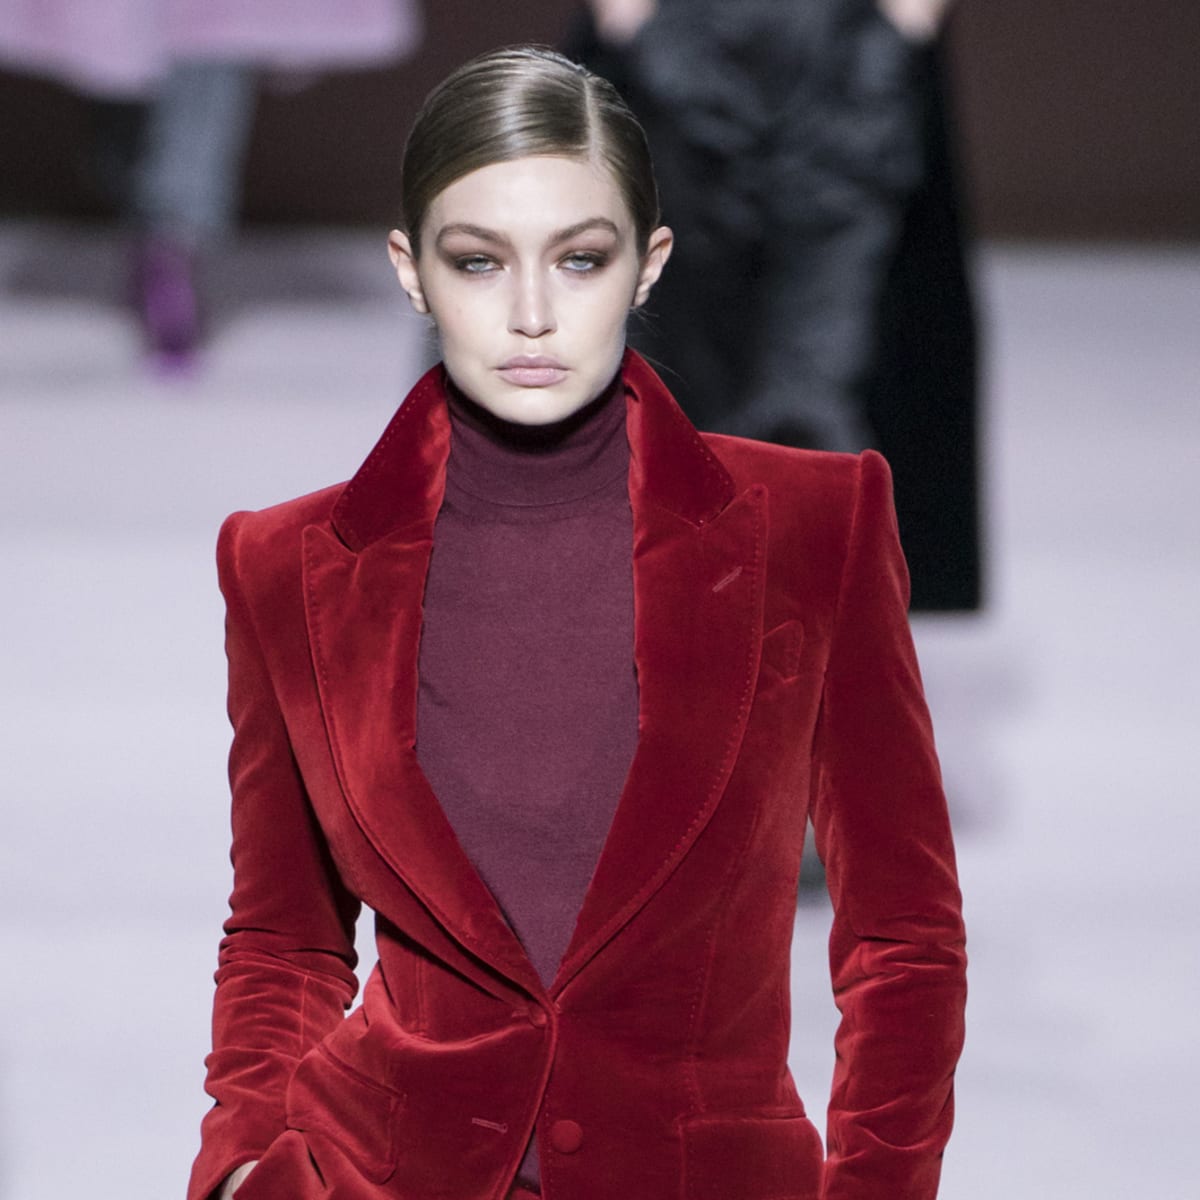 Tom Ford Takes Us Back to His '90s Heyday for Fall 2019 - Fashionista